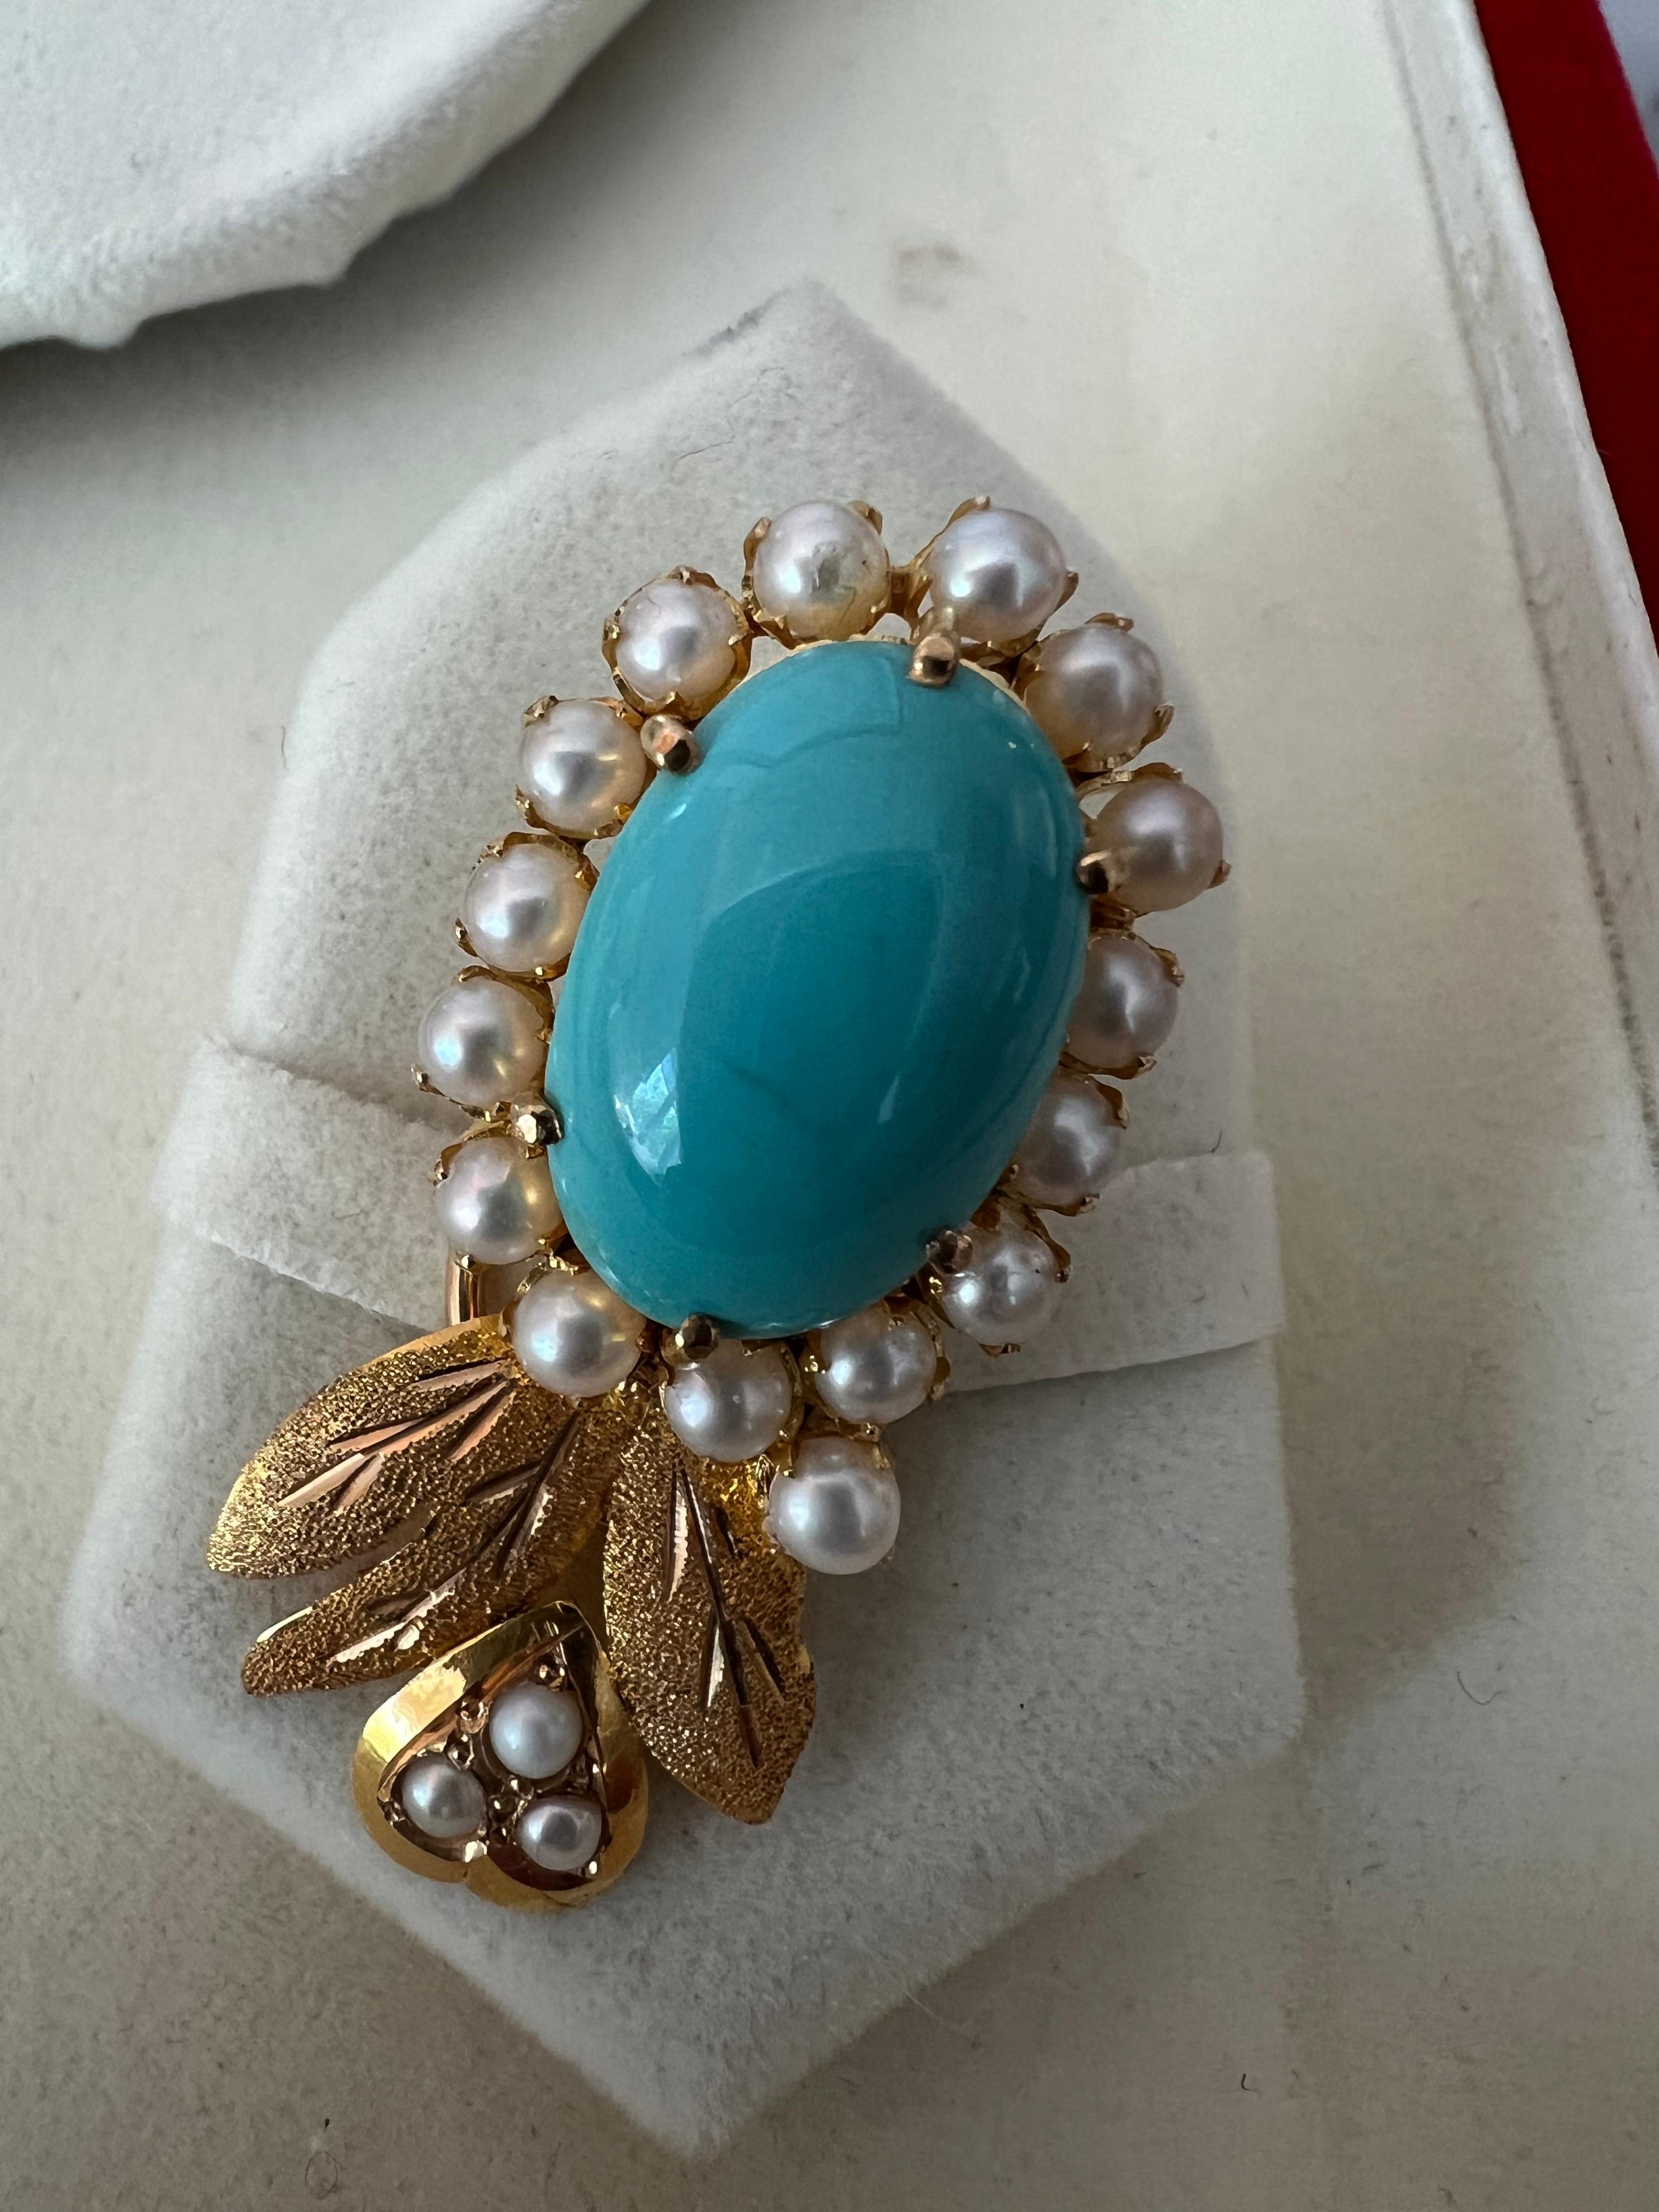 Turkish 18k Gold Turquoise, Pearl Necklace & Earrings Set  In Good Condition For Sale In Aliso Viejo, CA